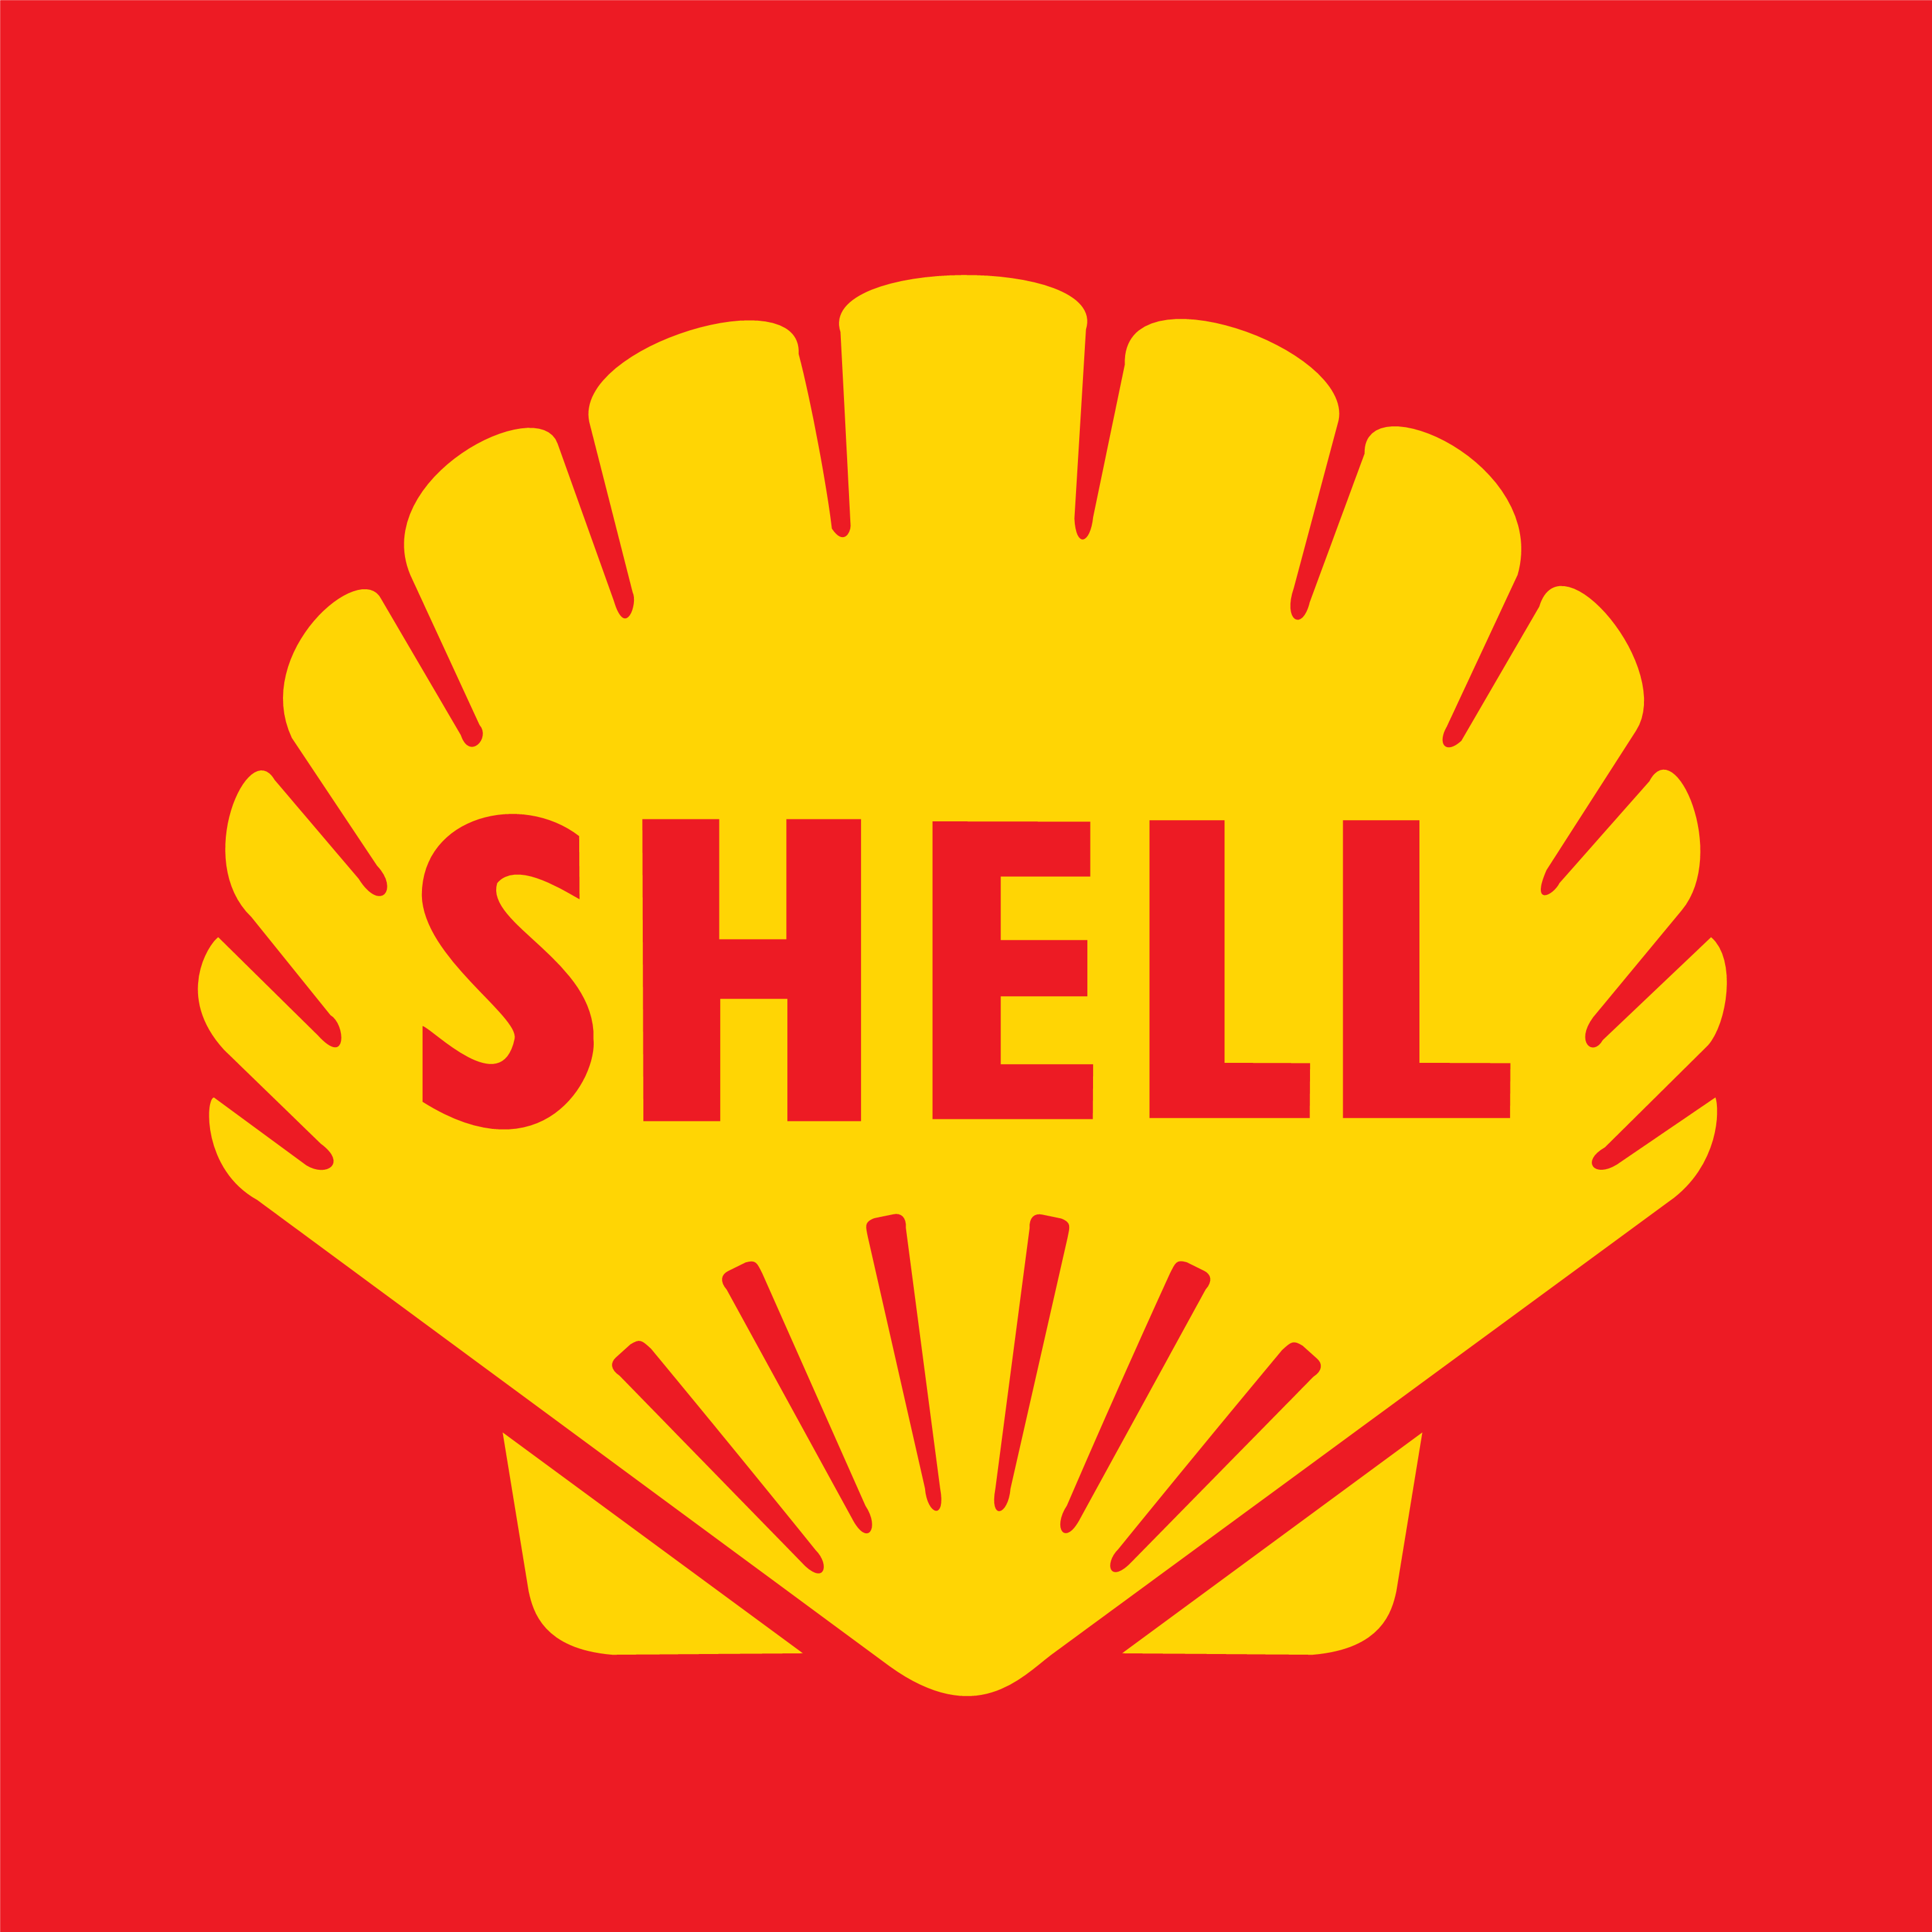 Old Shell Logo - Shell: The evolution of a logo